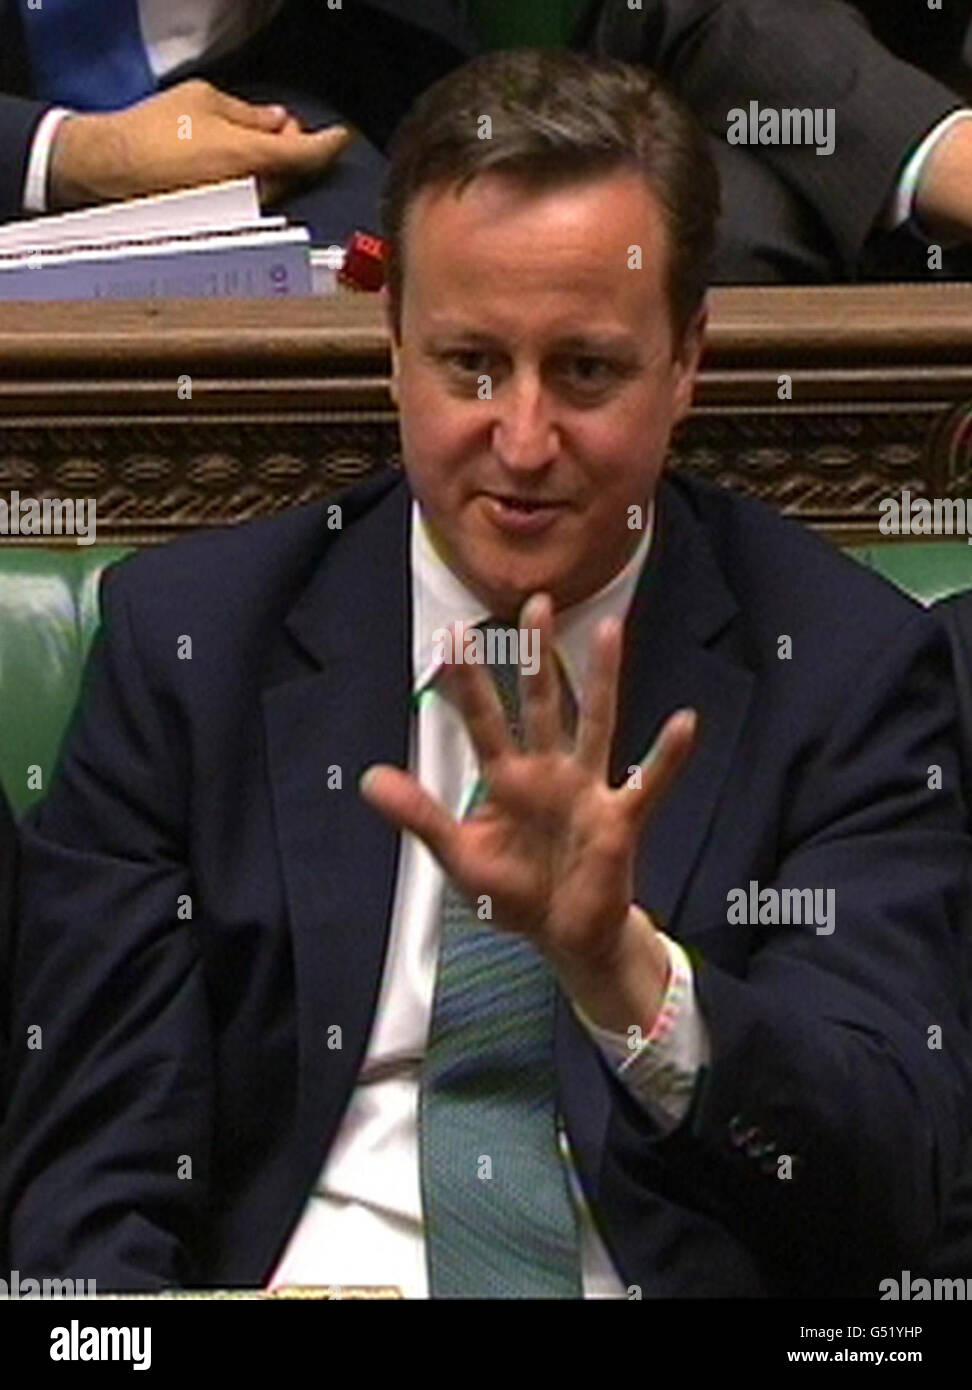 Prime Minister David Cameron gestures as Labour party leader Ed Miliband responds to the Budget statement in the House of Commons, London. Stock Photo